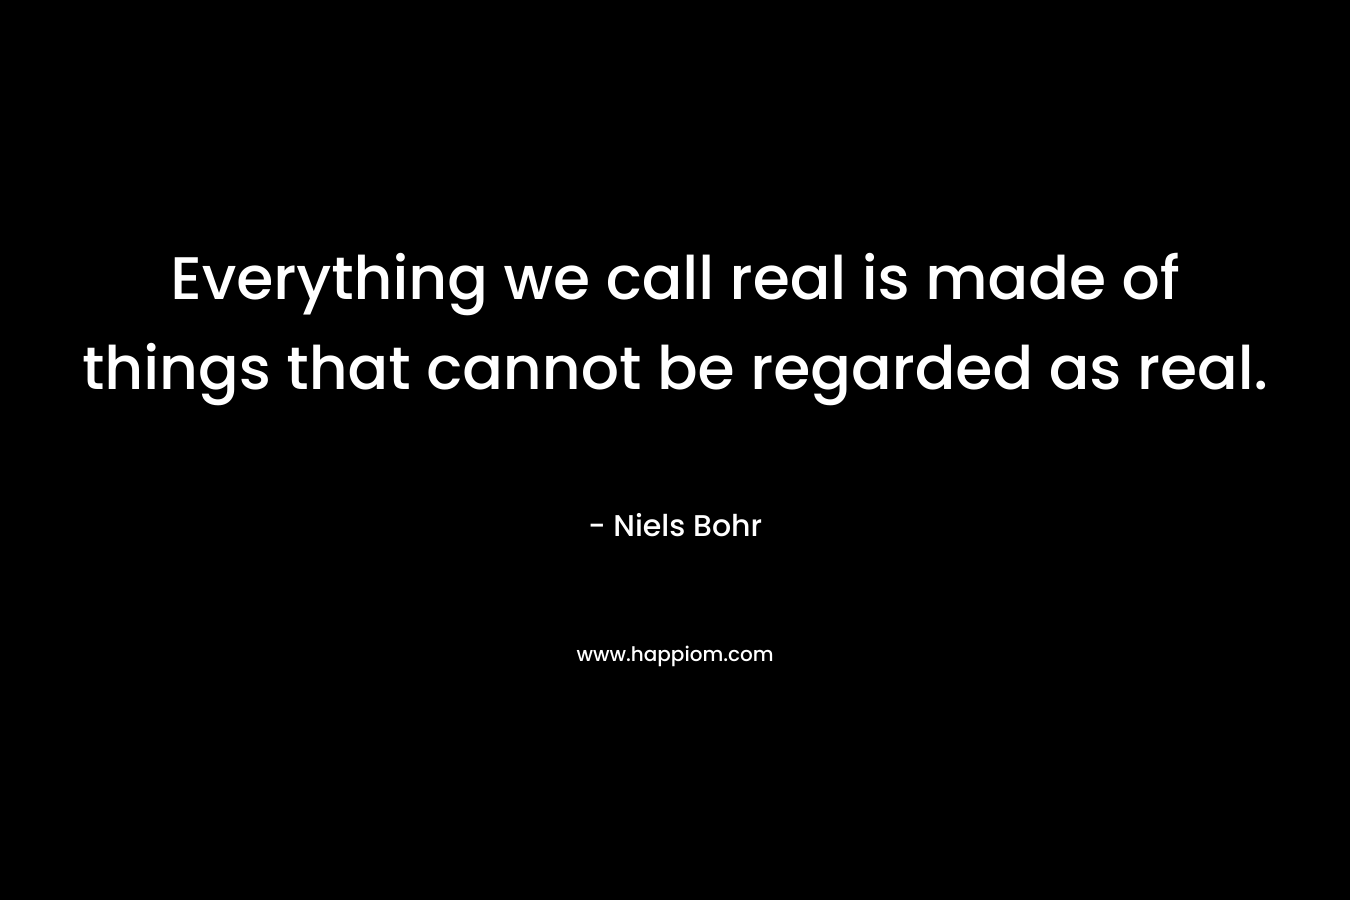 Everything we call real is made of things that cannot be regarded as real. – Niels Bohr